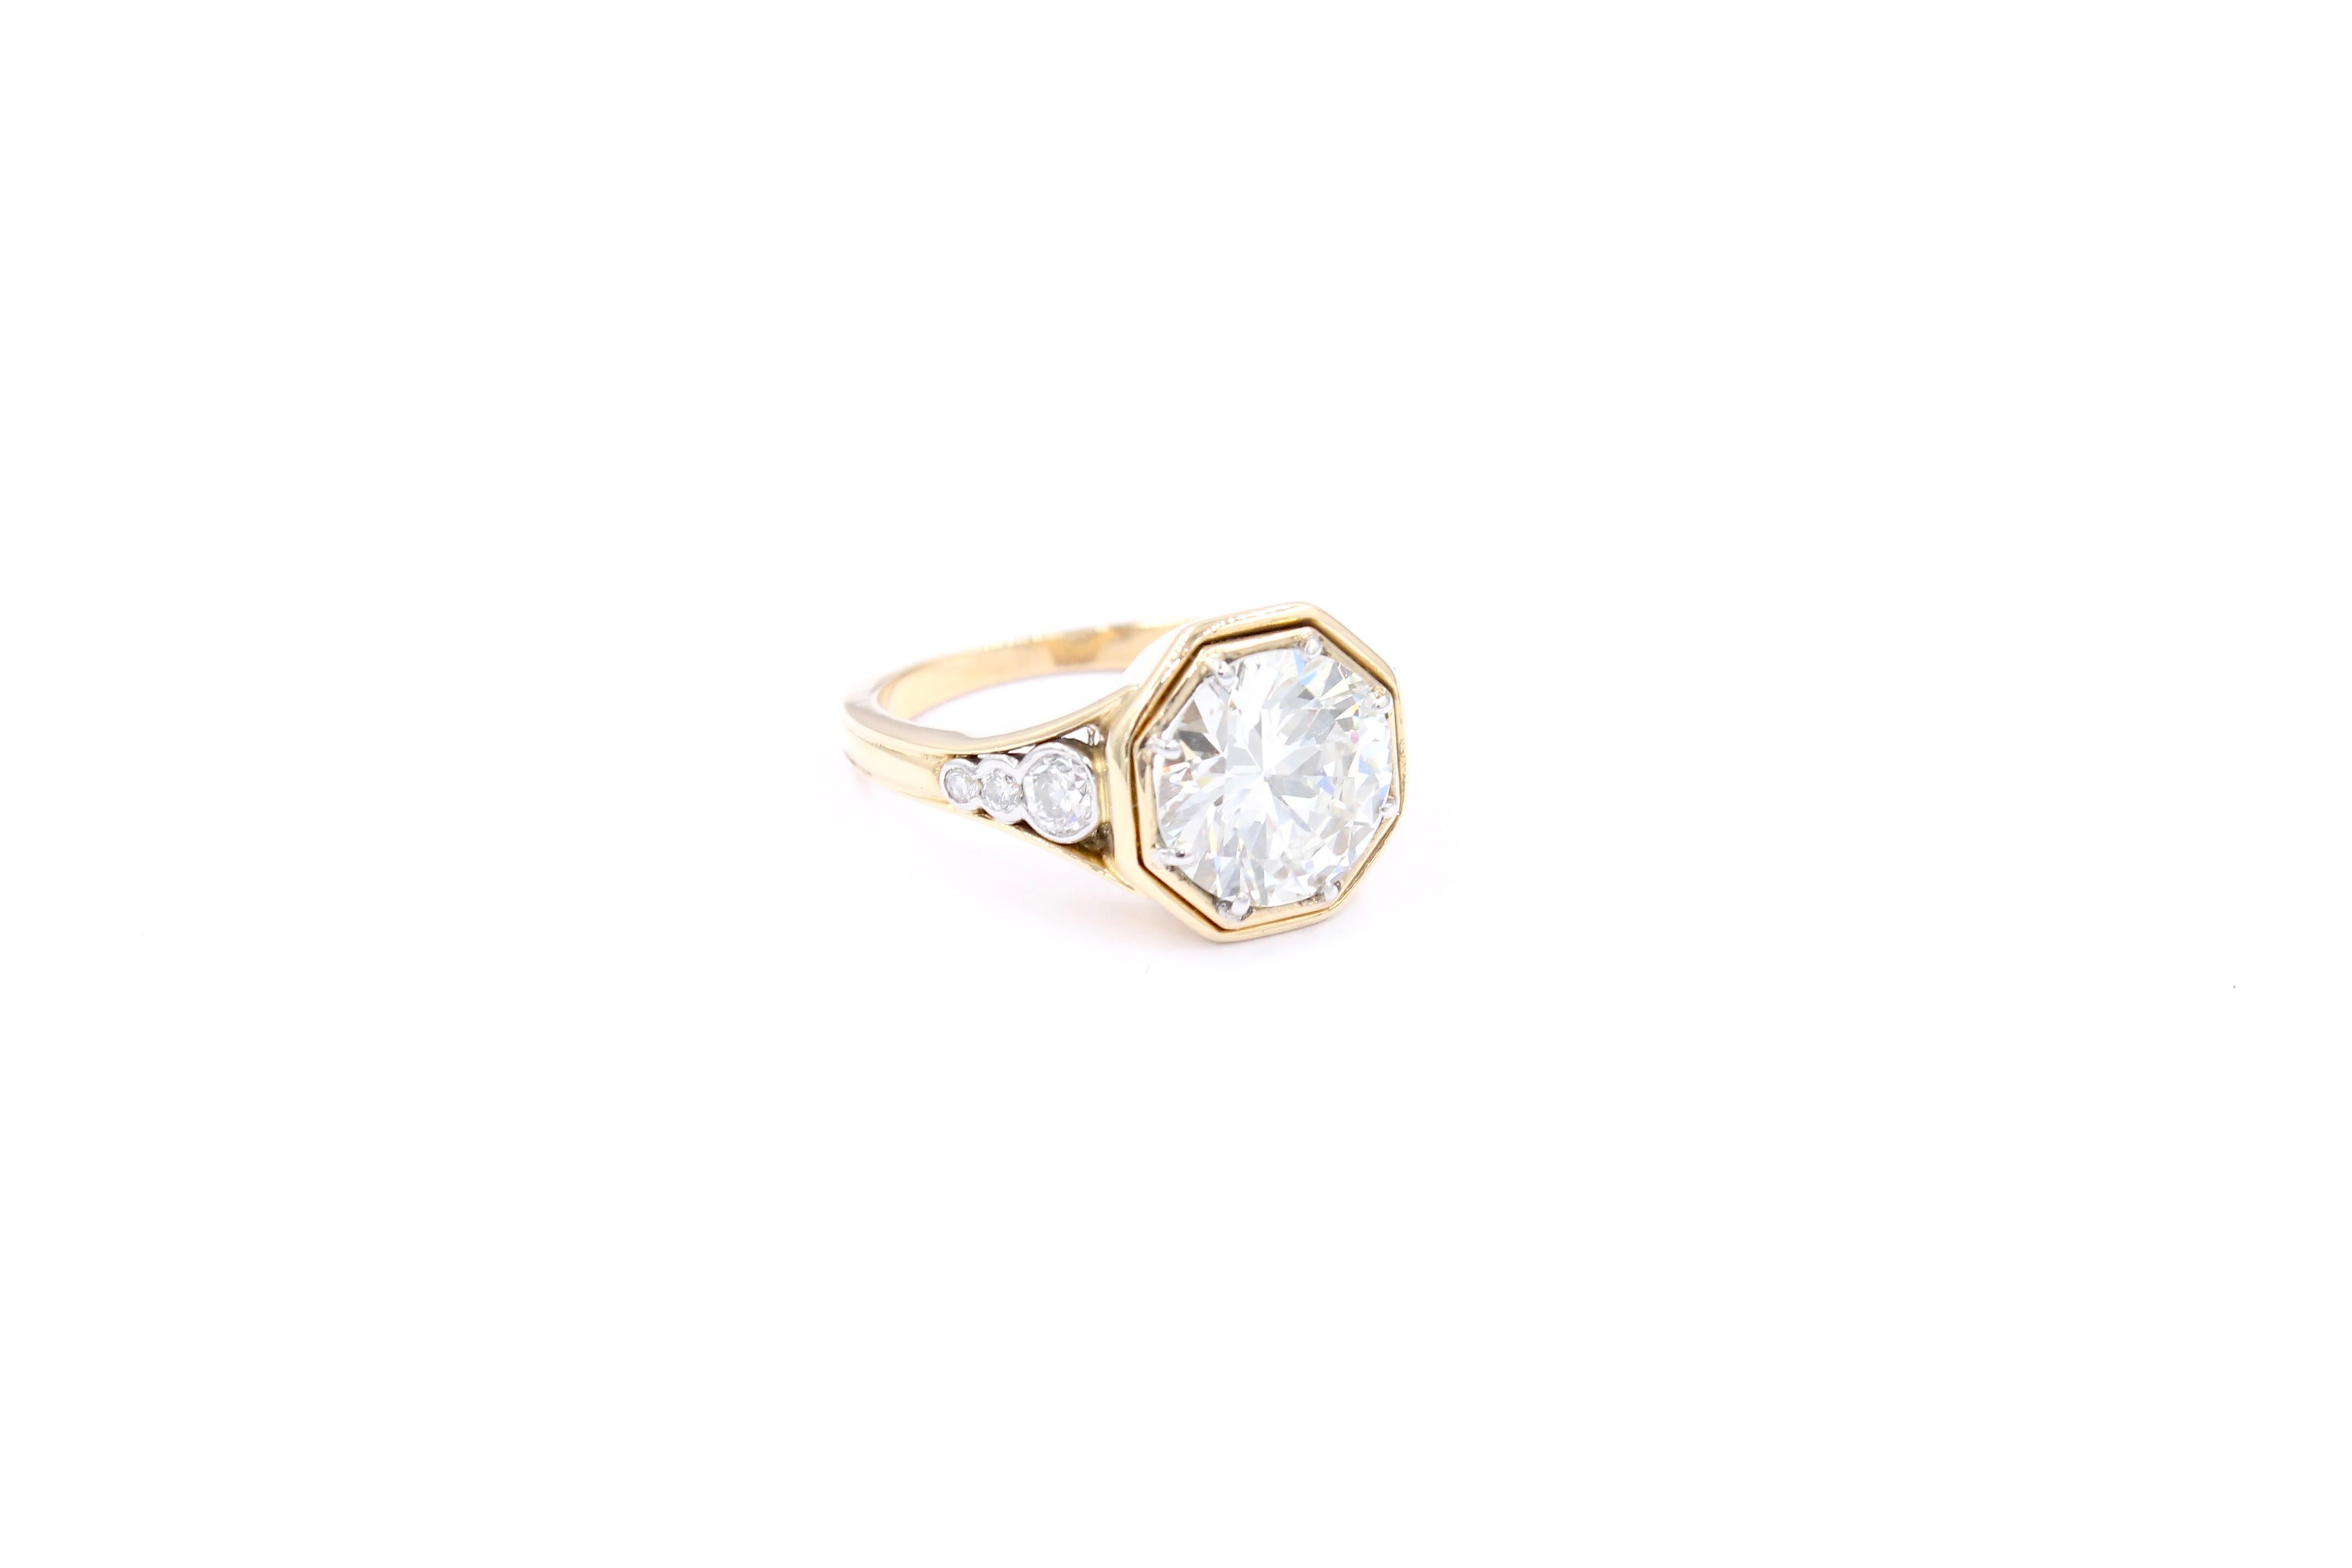 Wolfers diamond ring circa 1980 - 1990

18 Karat bicolore white and yellow gold ring set with a center 2.78 Carat natural brilliant cut diamond ( IGI certified, K color - Si1 purity) and 6 brilliant cut diamonds for a total of approximately 0.22